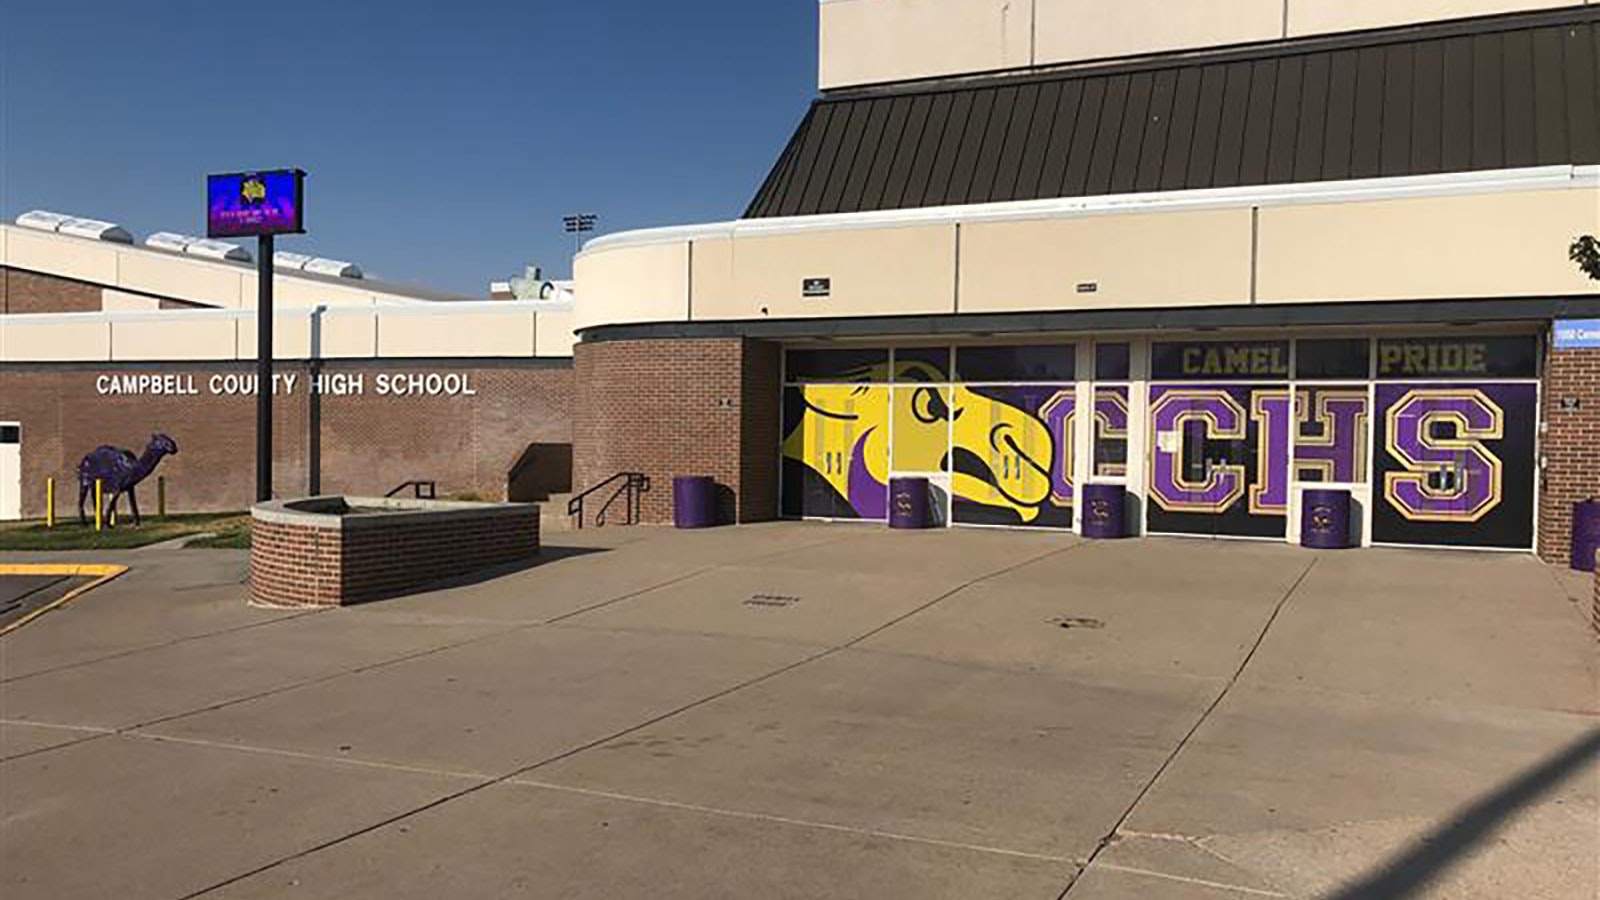 Campbell County High School in Gillette, Wyoming.